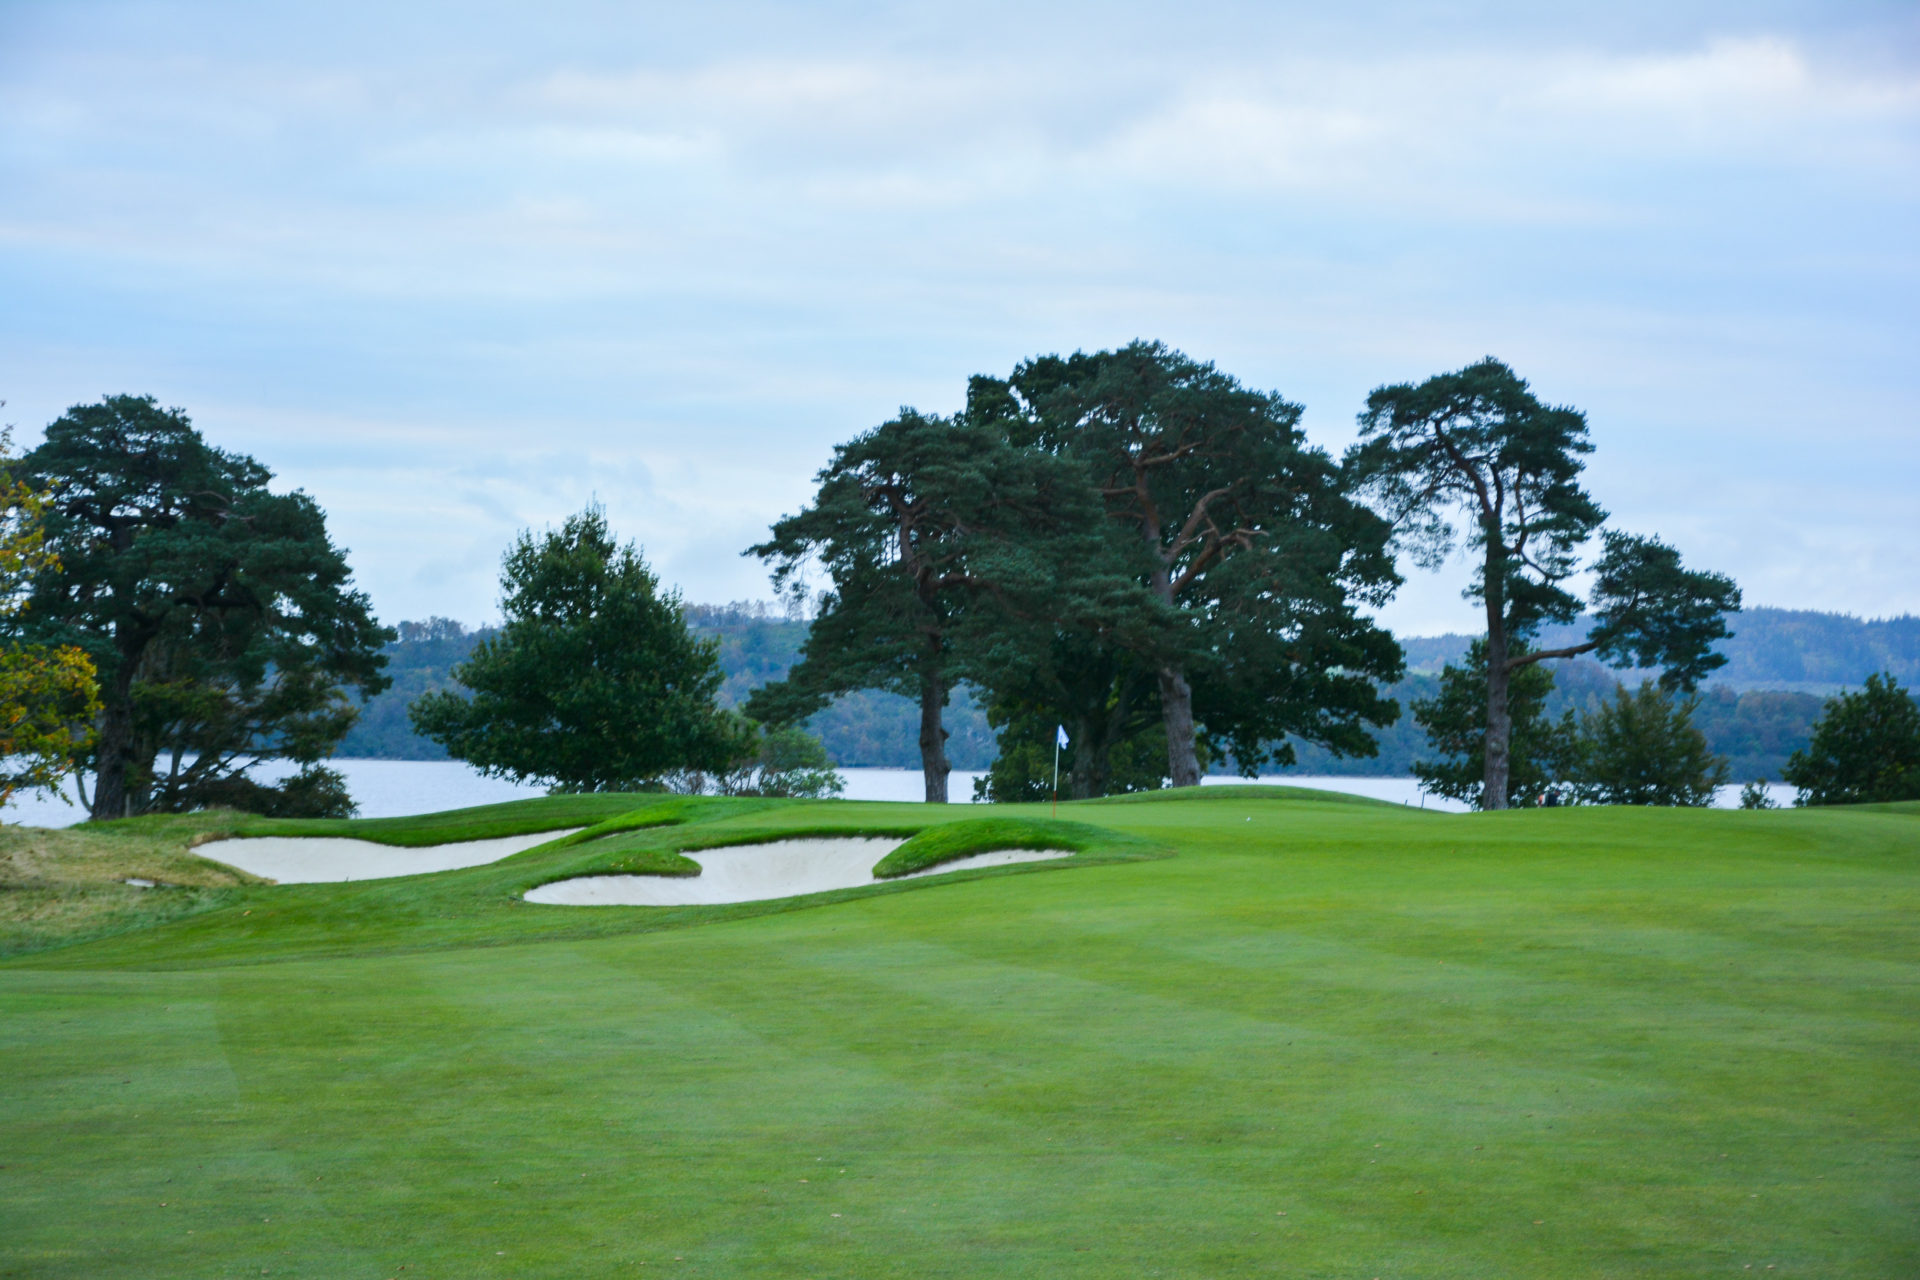 A look at the first Green at Loch Lomond Golf Club outside Glasgow, Scotland